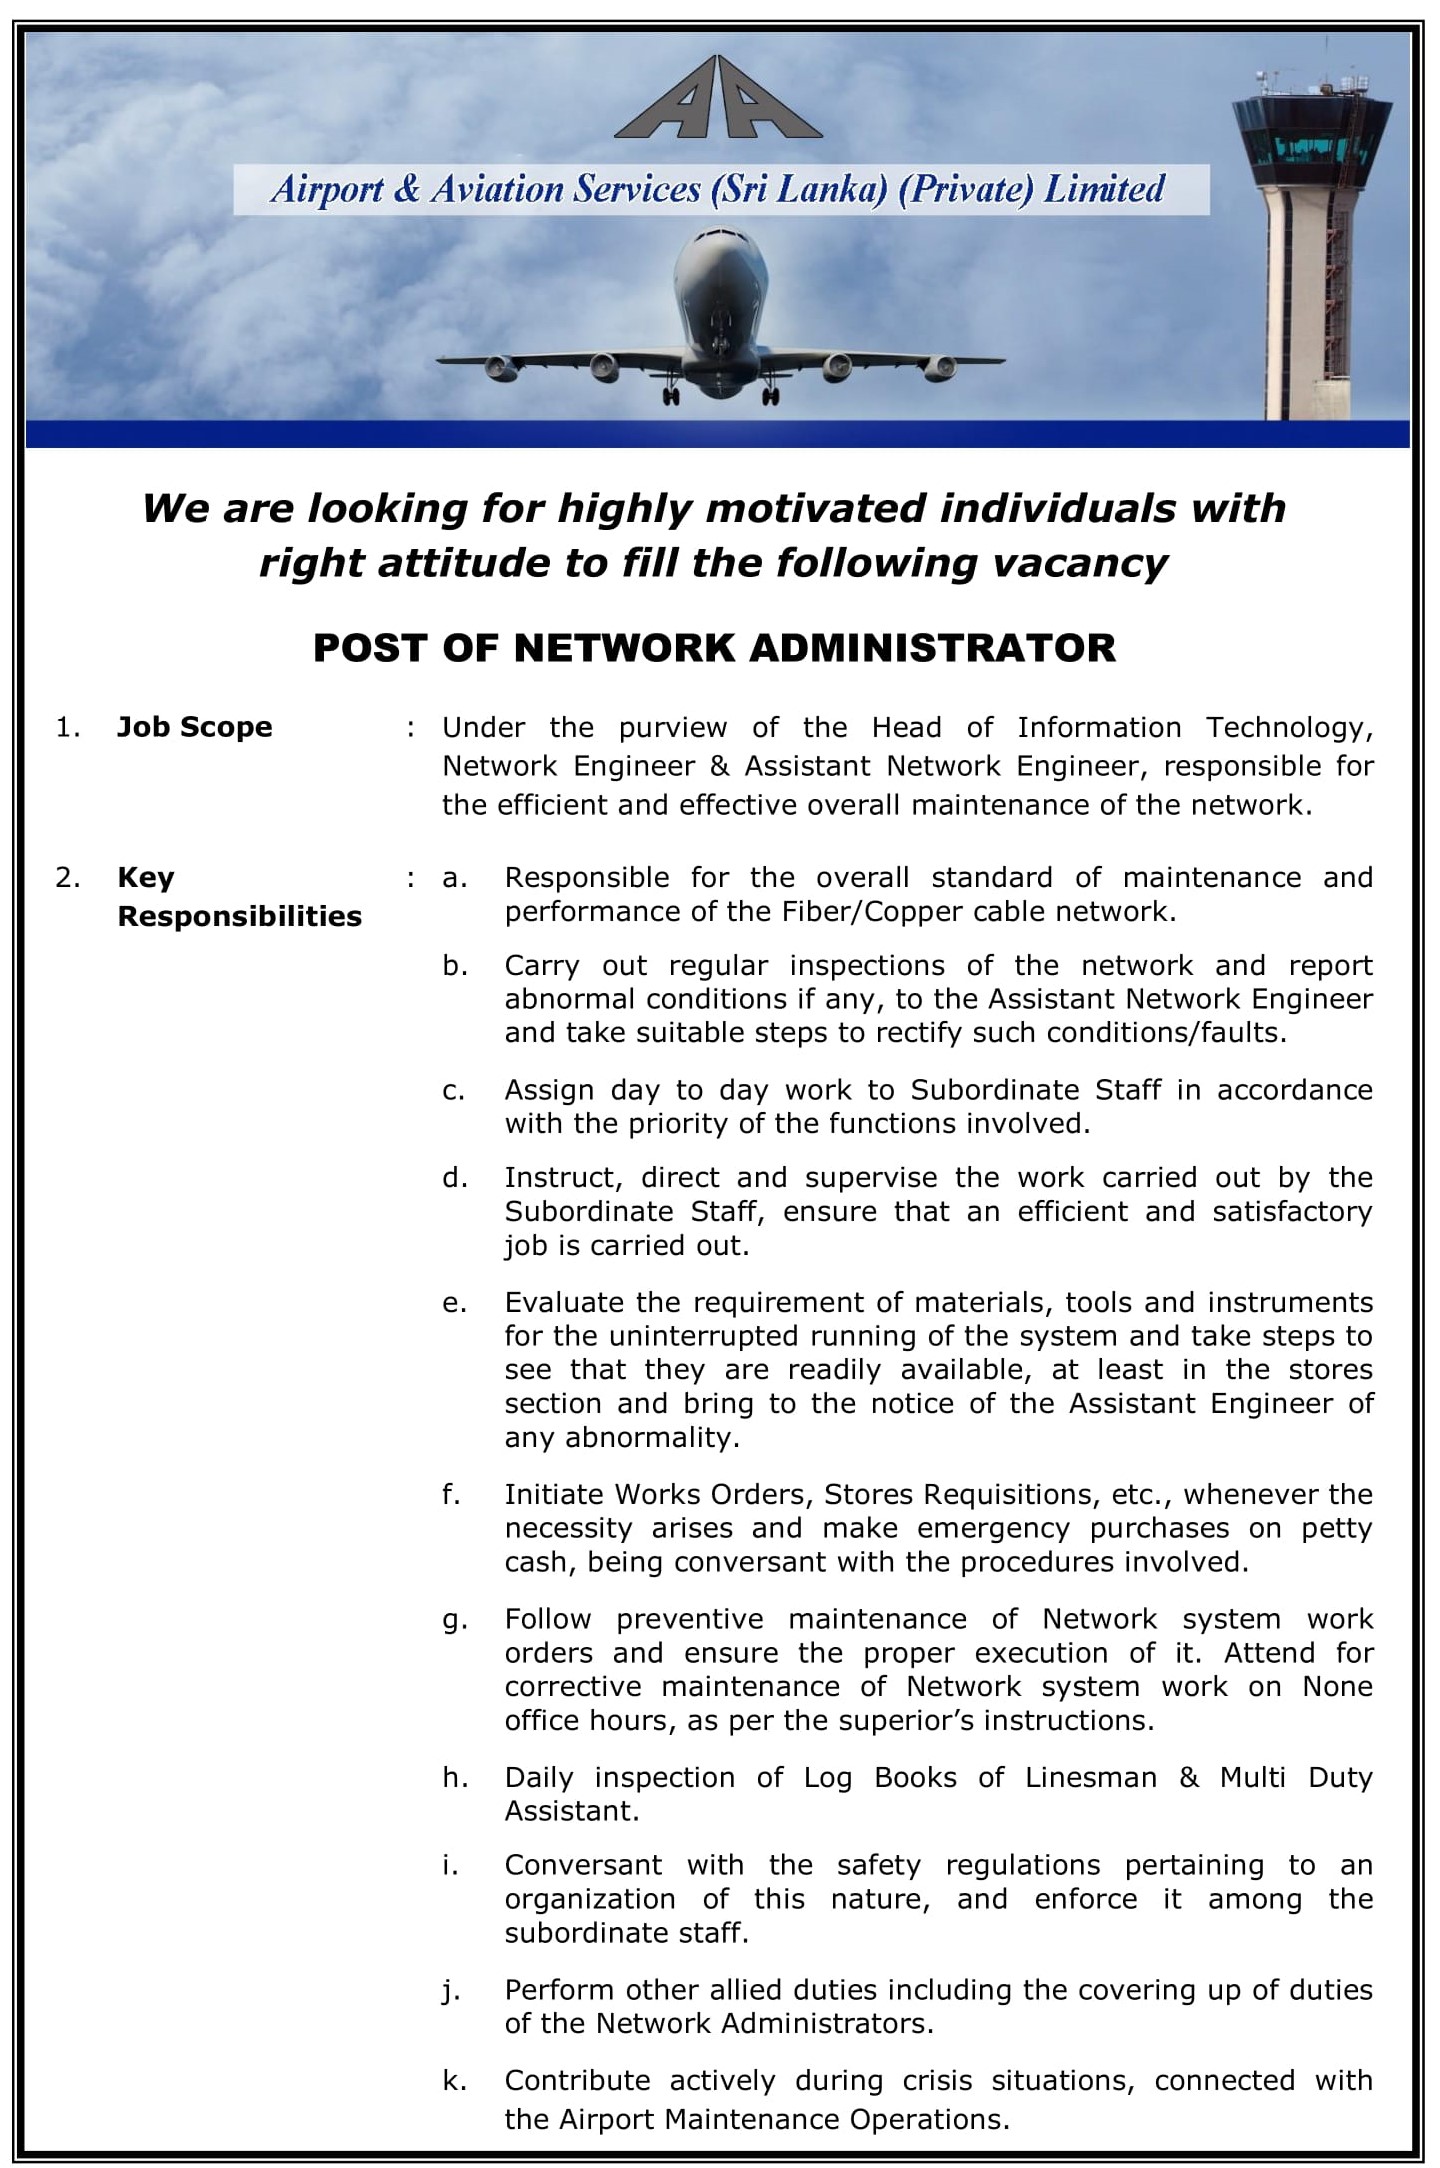 Network Administrator – Airport & Aviation Services (Sri Lanka) (Private) Limited